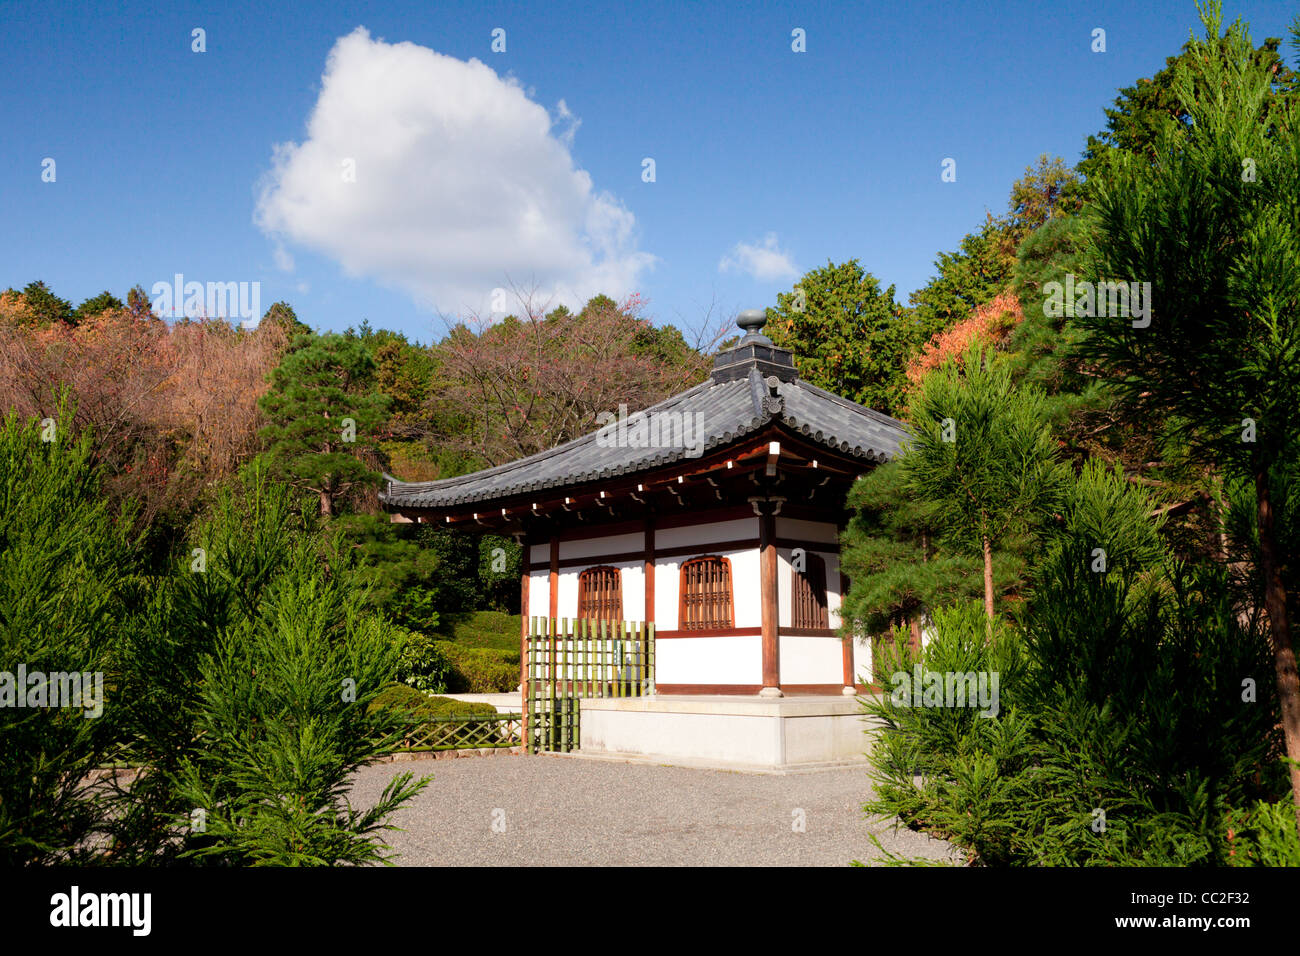 A small school building in the grounds of Ryoan-ji temple in Kyoto, Japan Stock Photo